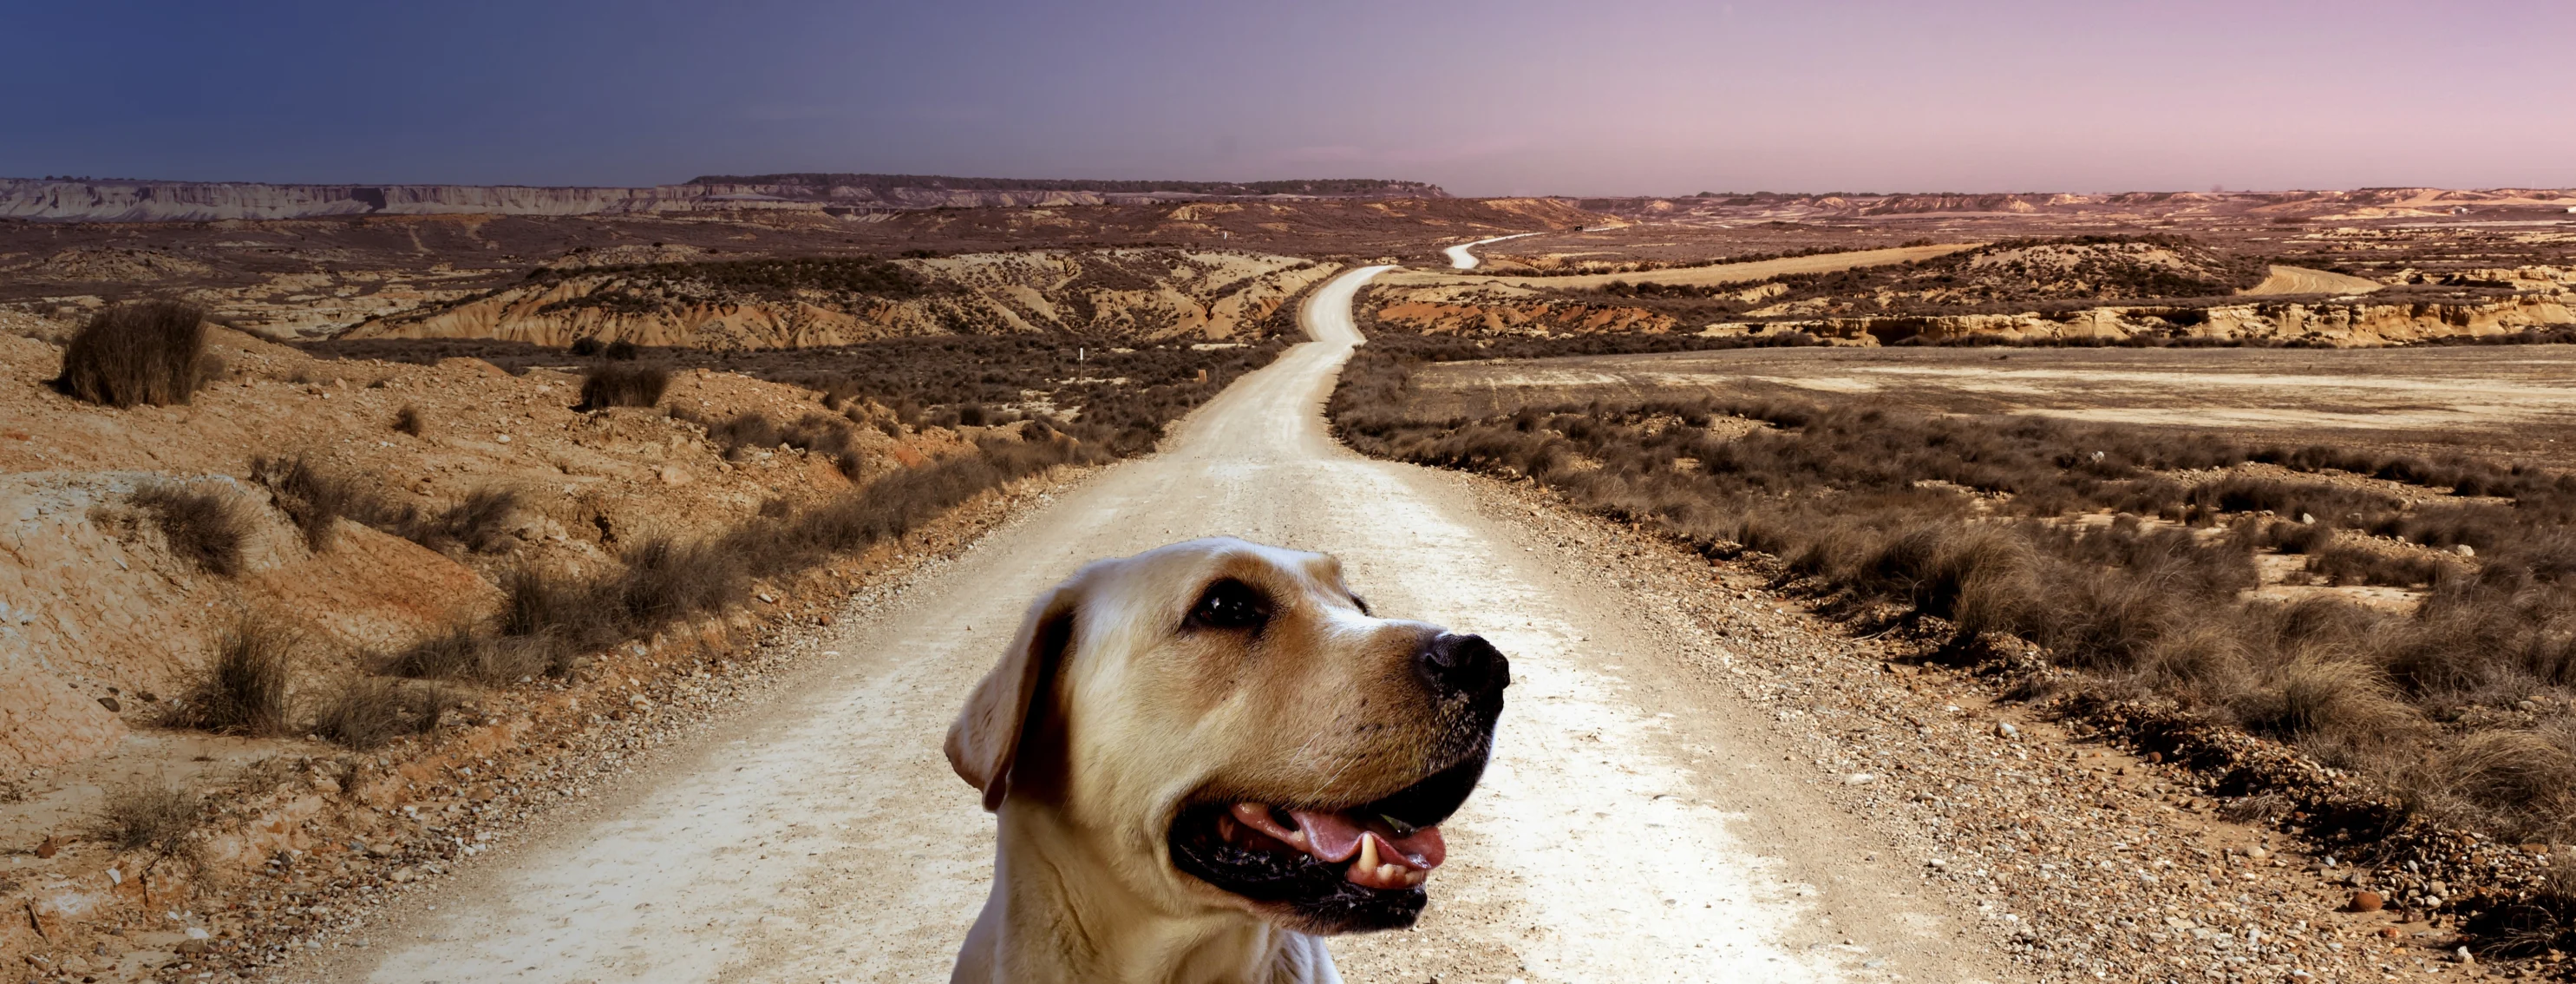 Dog sitting in the desert on an open road